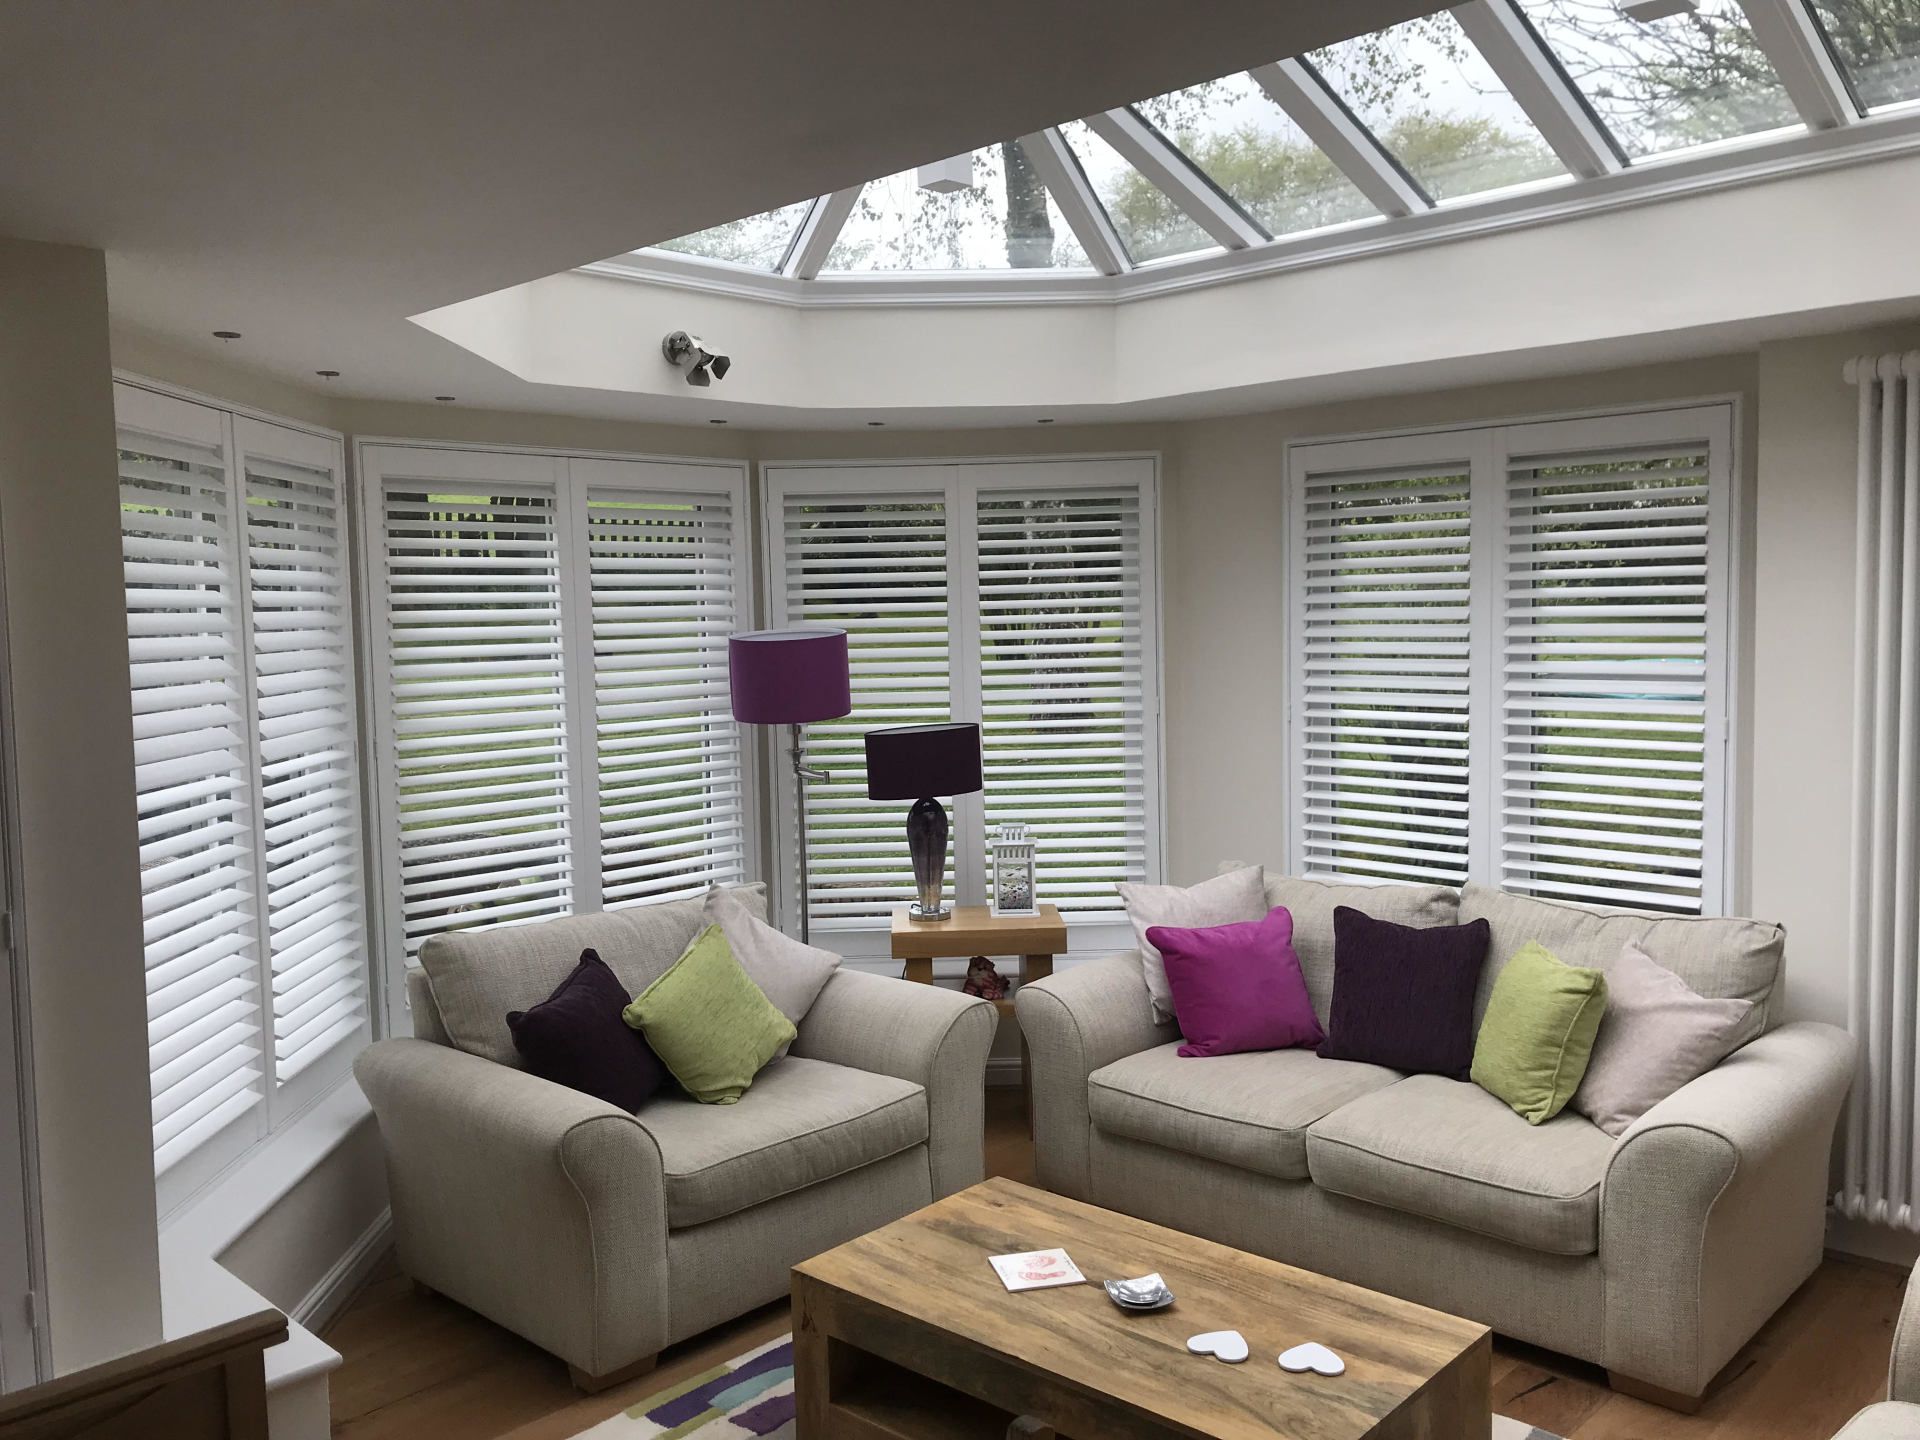 British Made Shutters available to purchase in Thames Ditton | Wooden Shutters | Patio Door Shutters |  Made-to-Measure Shutters